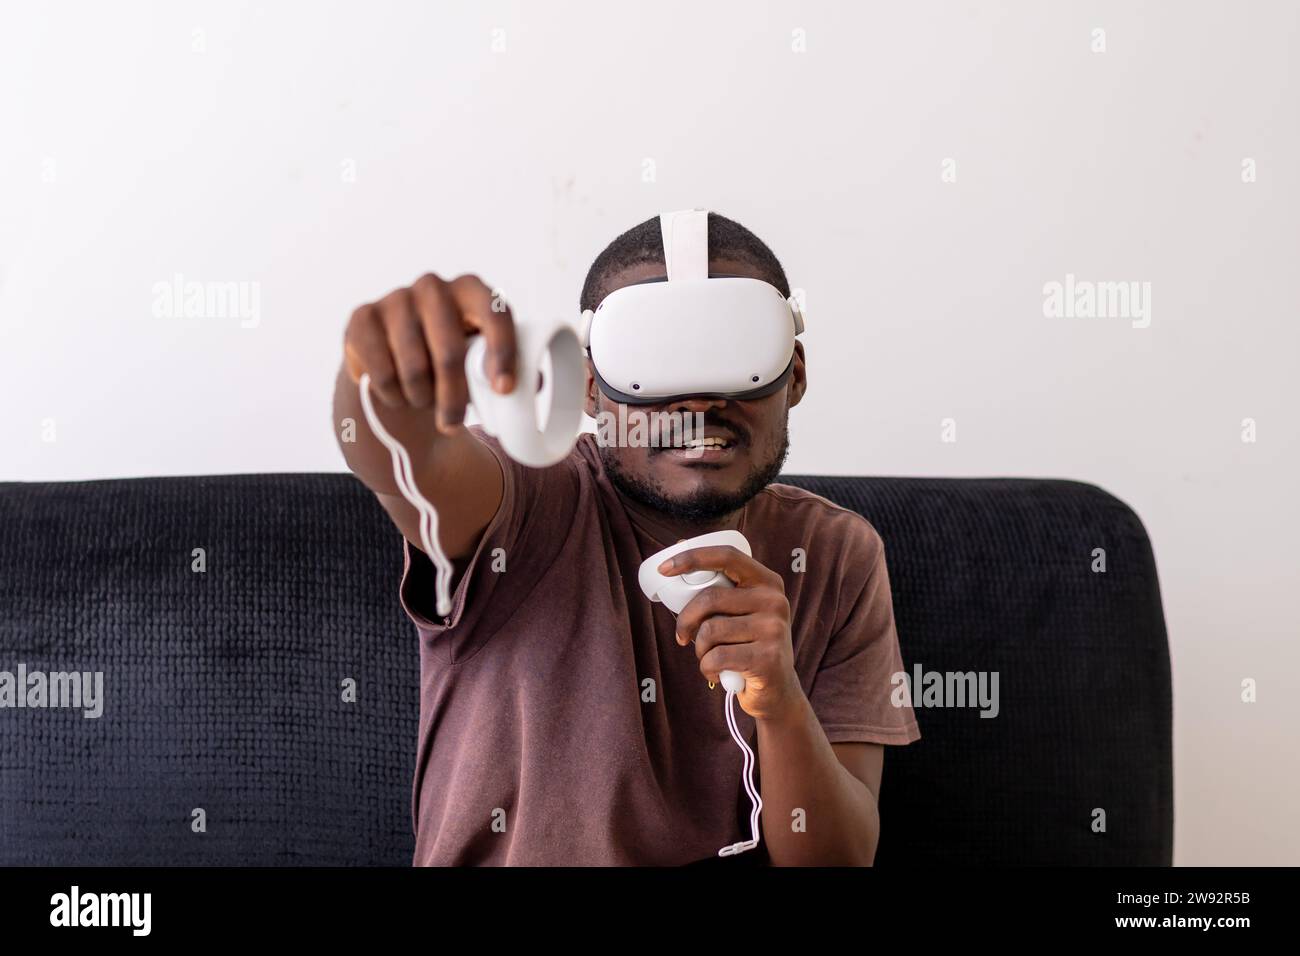 young man wearing a vr headset engrossed in a virtual reality game and holding controllers sitting on a couch. Vr gaming concept Stock Photo